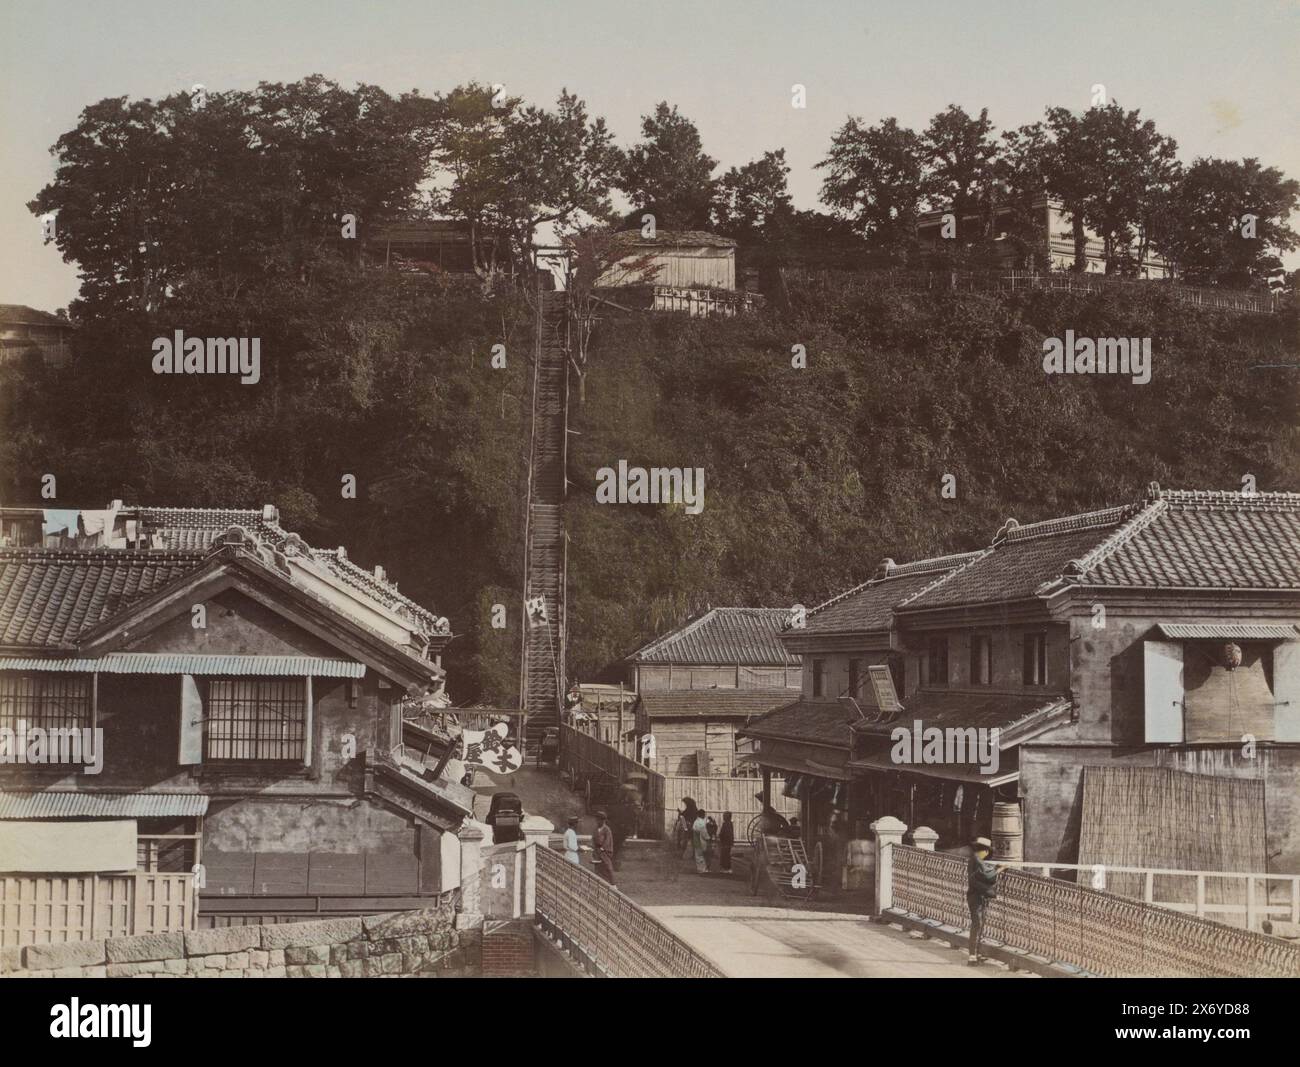 Village street with stairs in Japan, Part of Photo album with 50 photos of sights in Japan., photograph, anonymous, Japan, c. 1870 - c. 1900, paper, albumen print, height, 196 mm × width, 258 mm Stock Photo